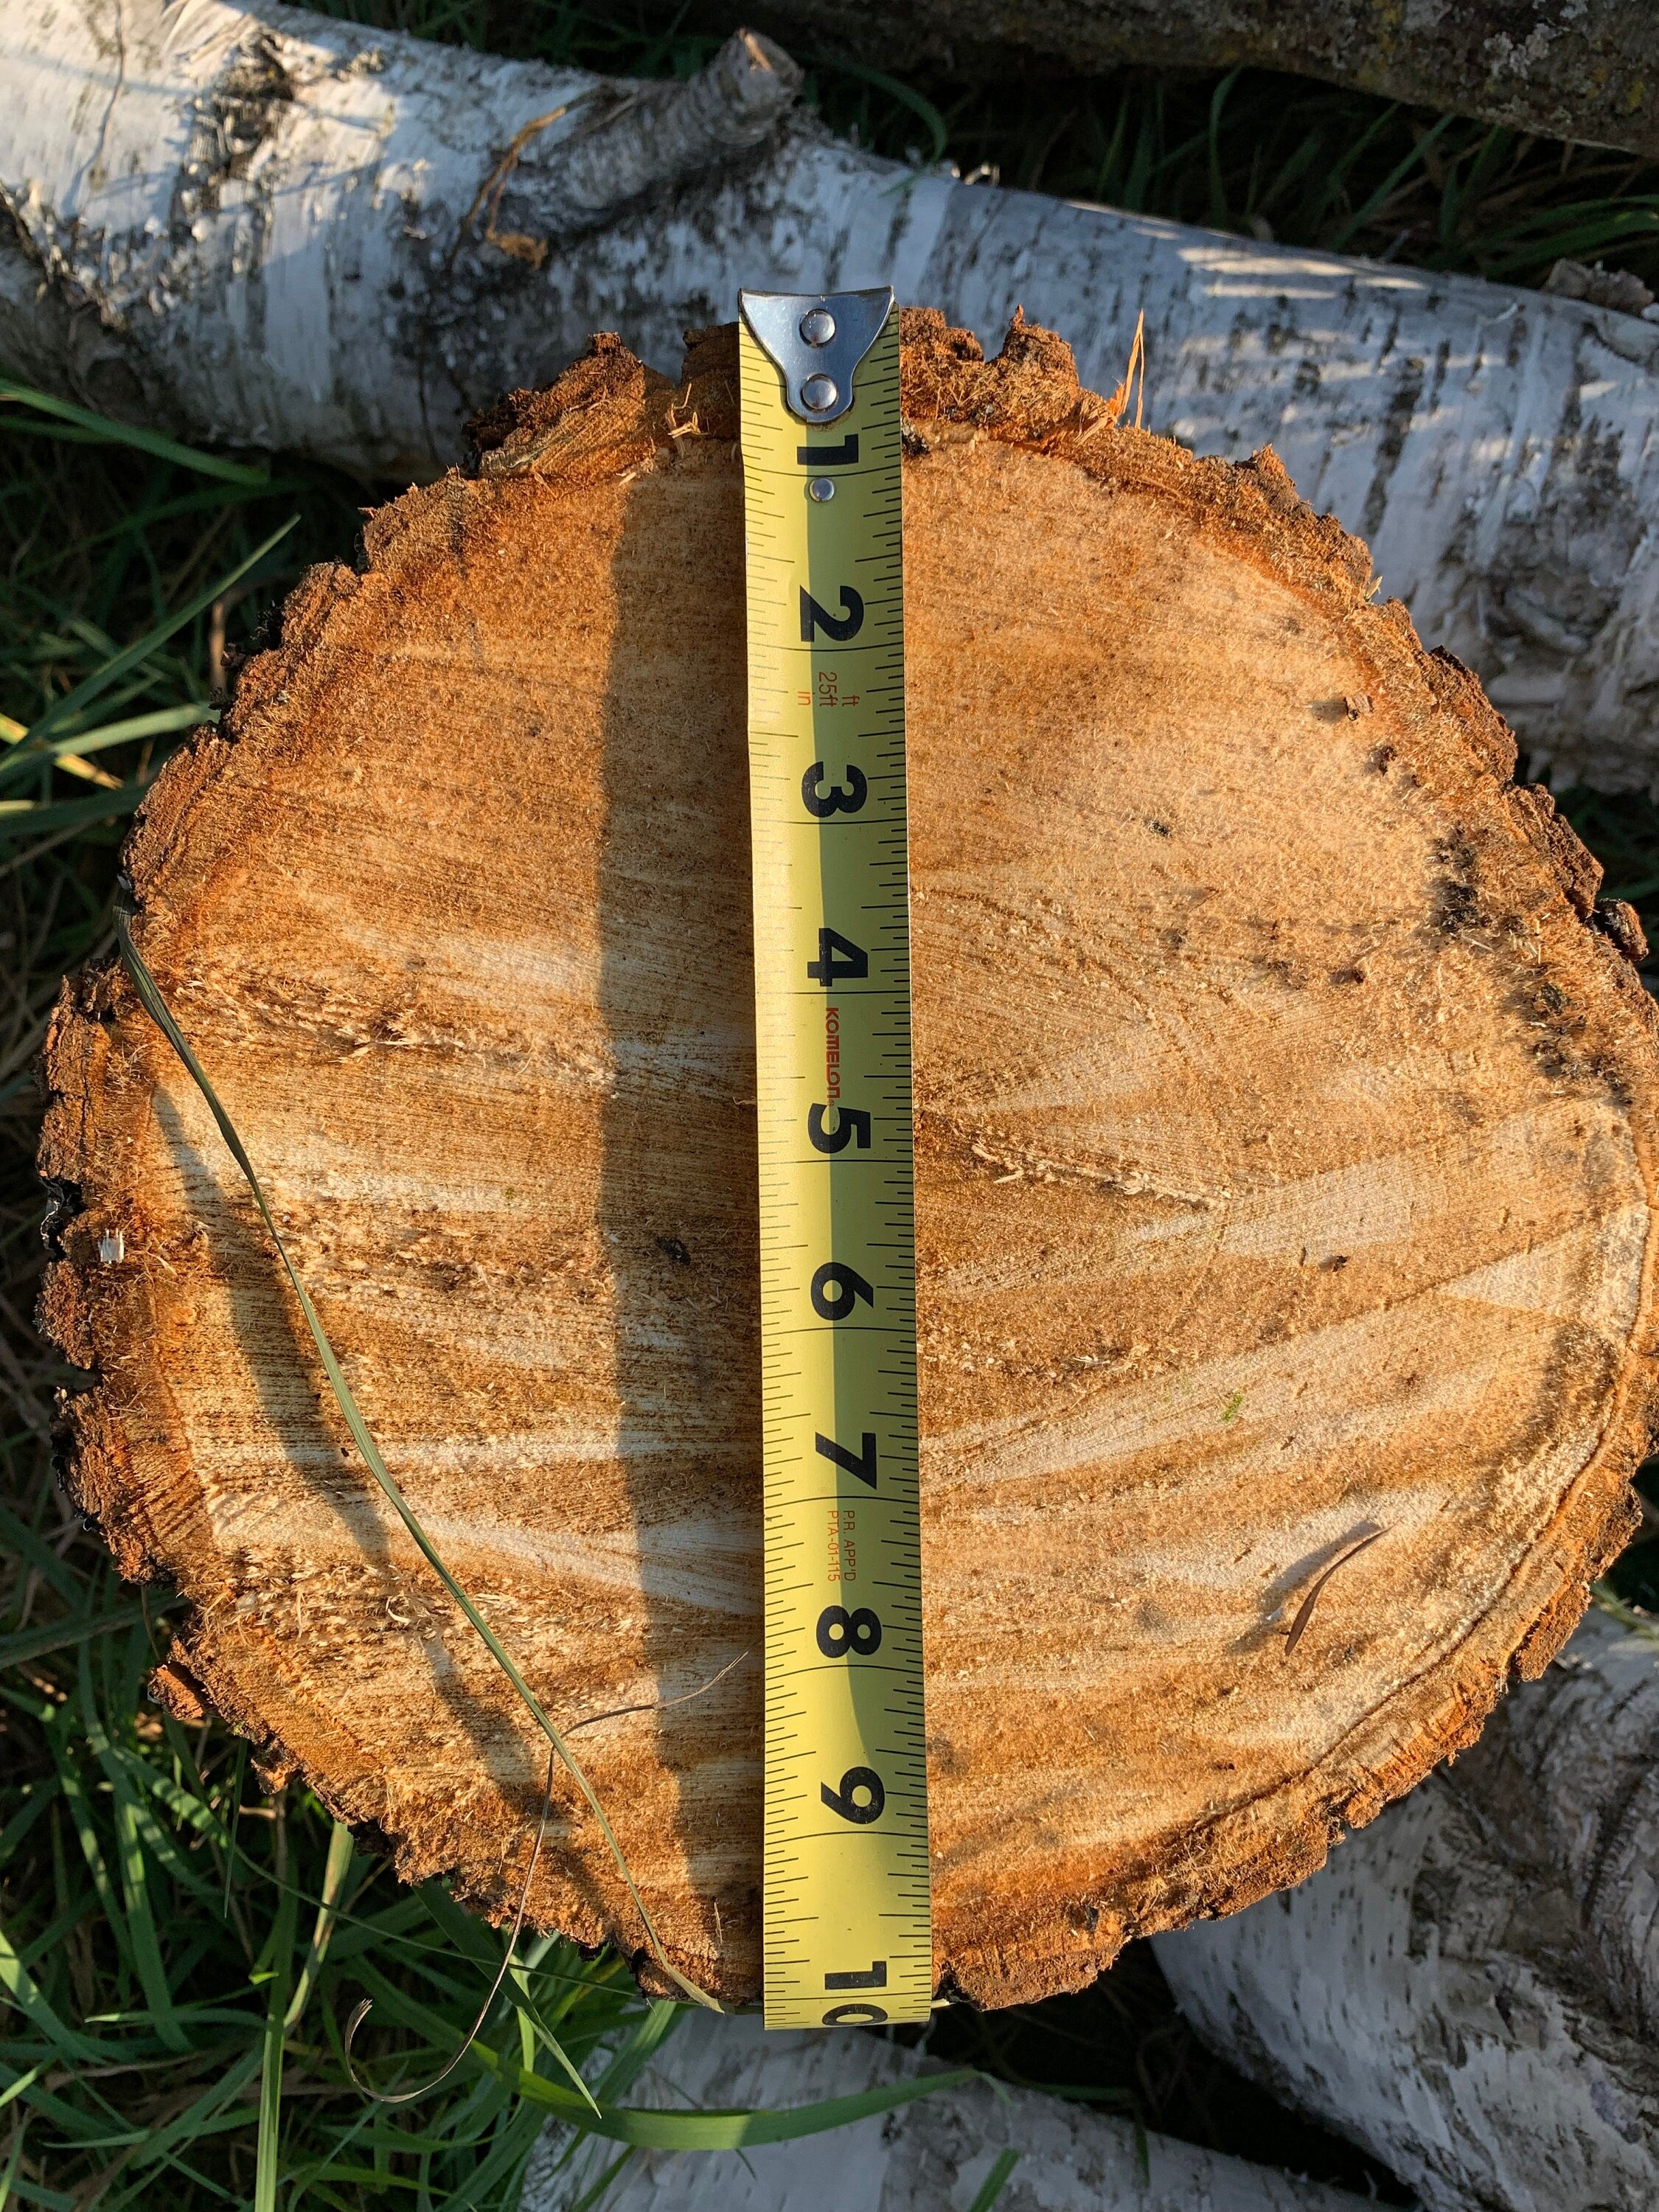 One Basswood Log, Approximately 12 Inches Long by 10 Inches Diameter